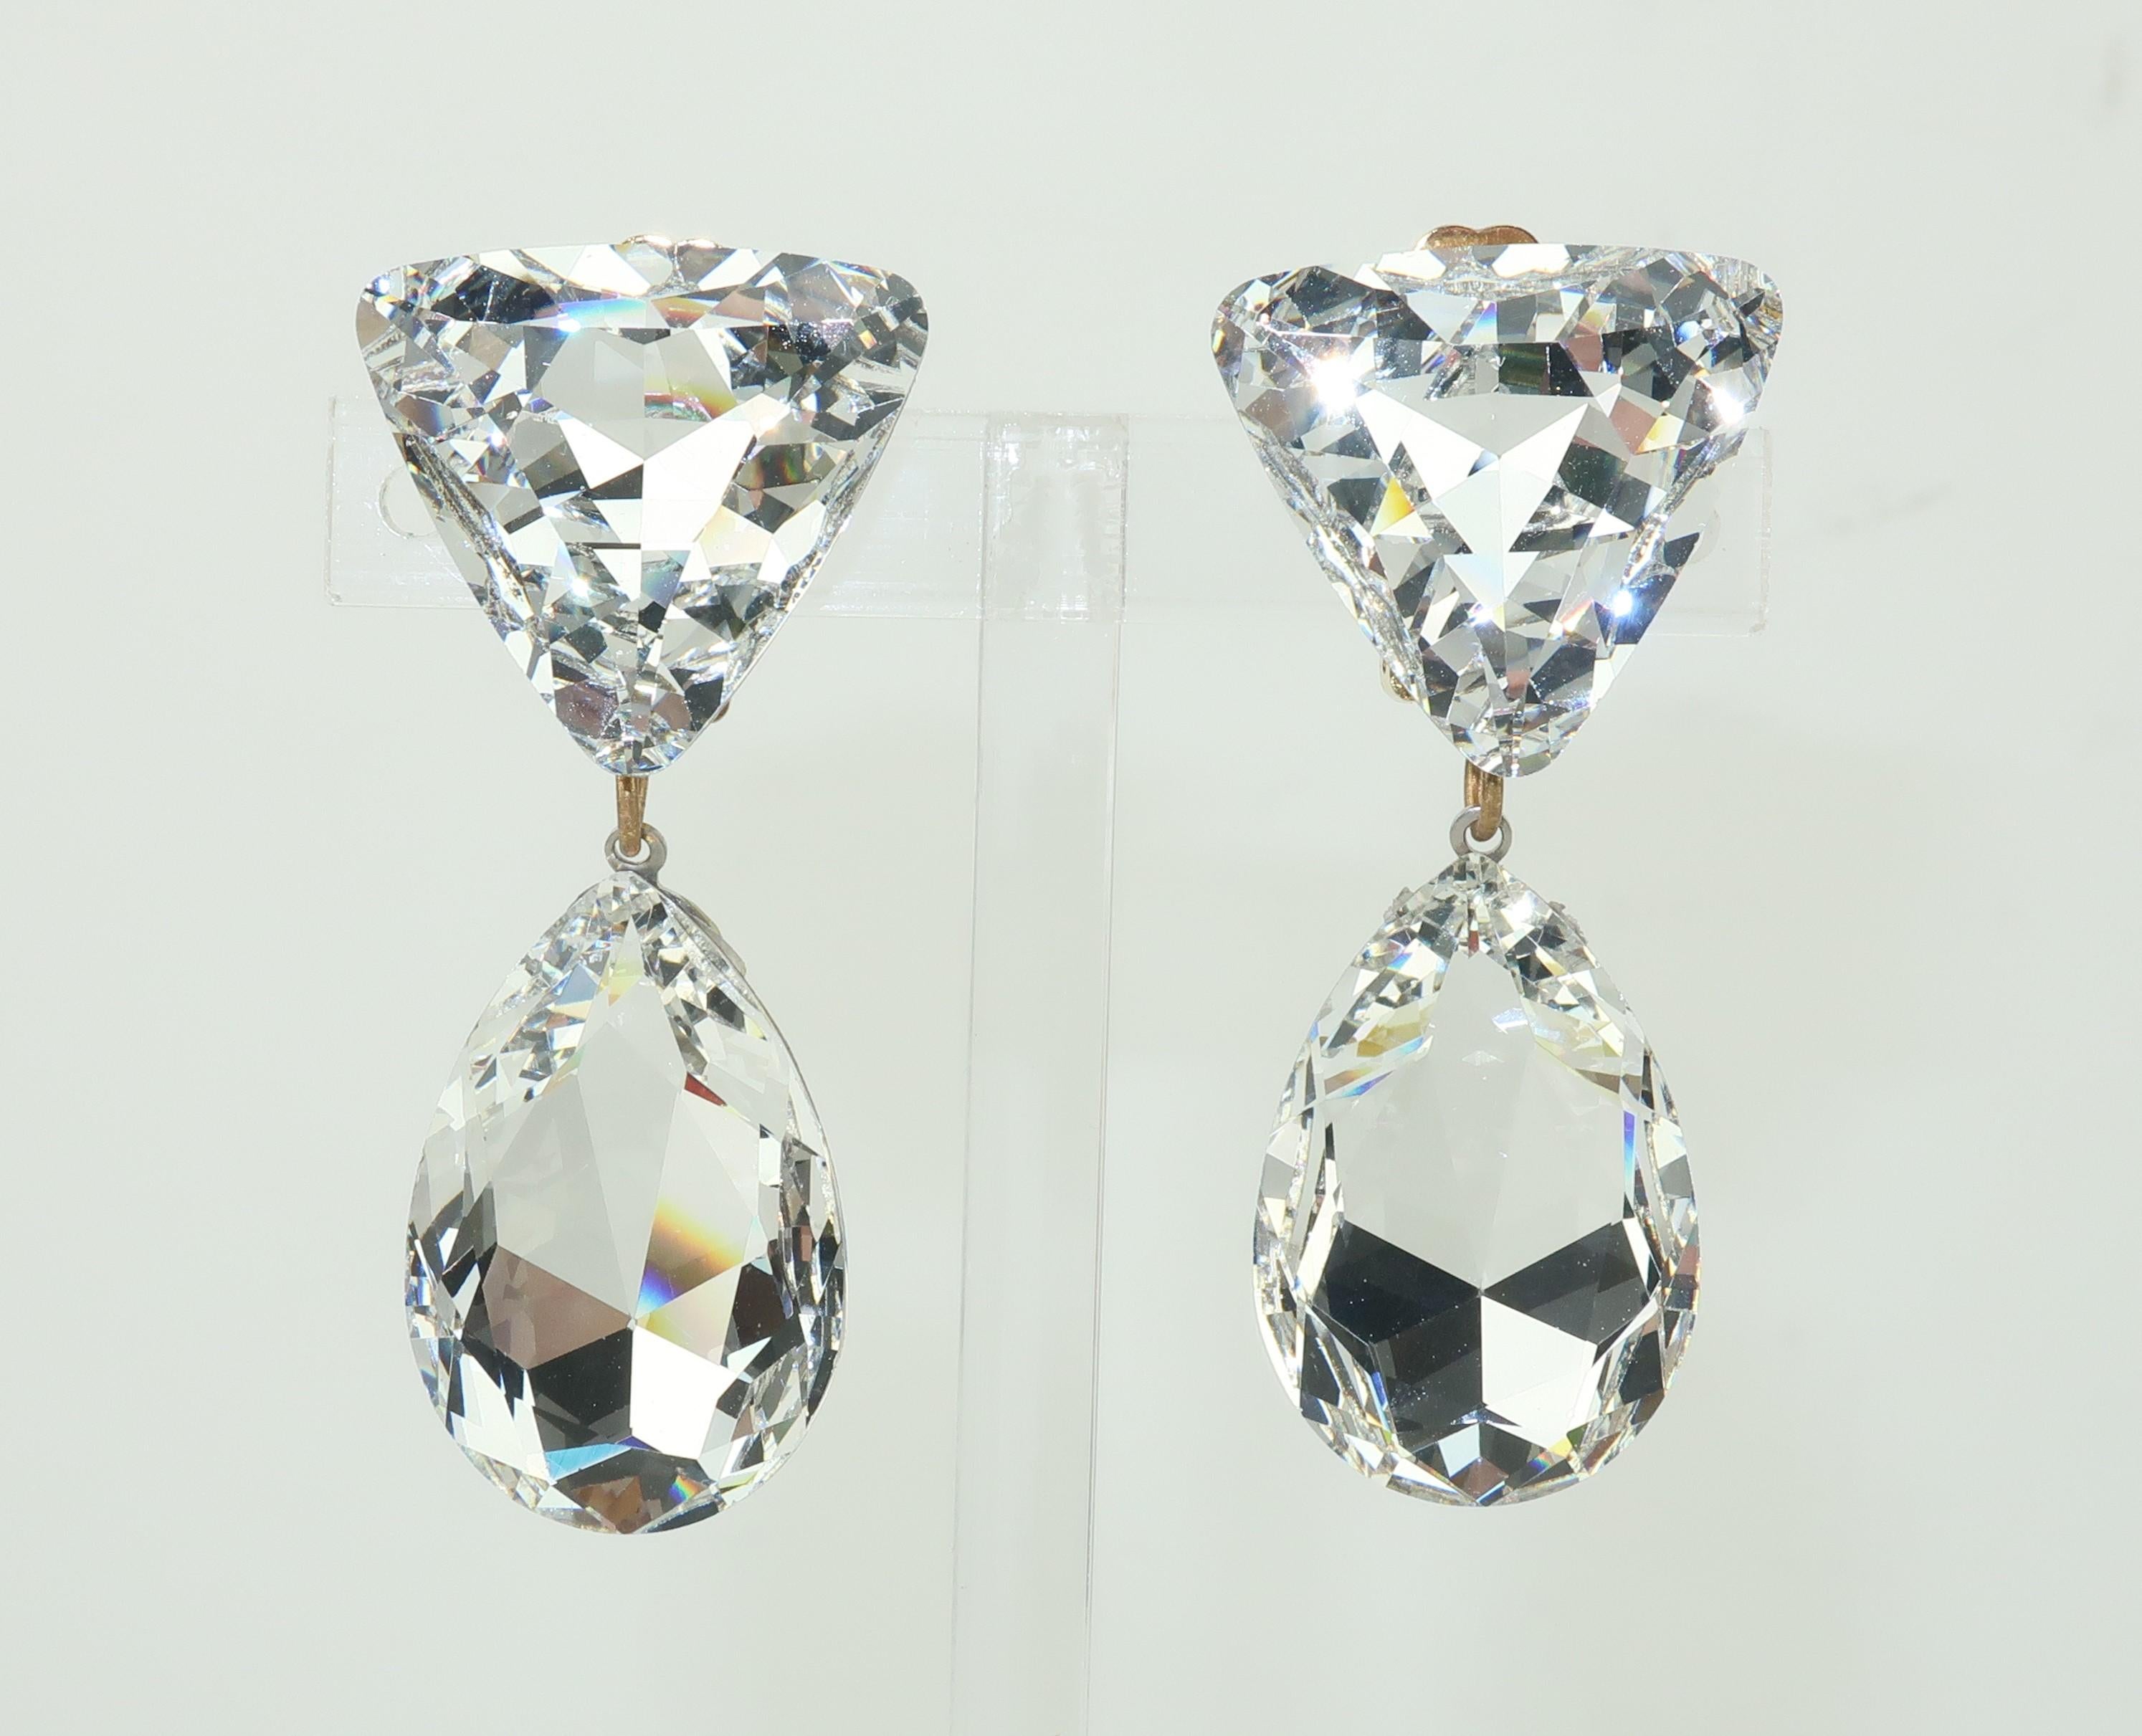 Diamonds might be a girl's best friend but crystals are her favorite sidekick!  These 1980's large crystal dangle earrings are dazzling and delightful ... sure to put a glamorous touch on any evening ensemble.  The gold tone clip on hardware keeps